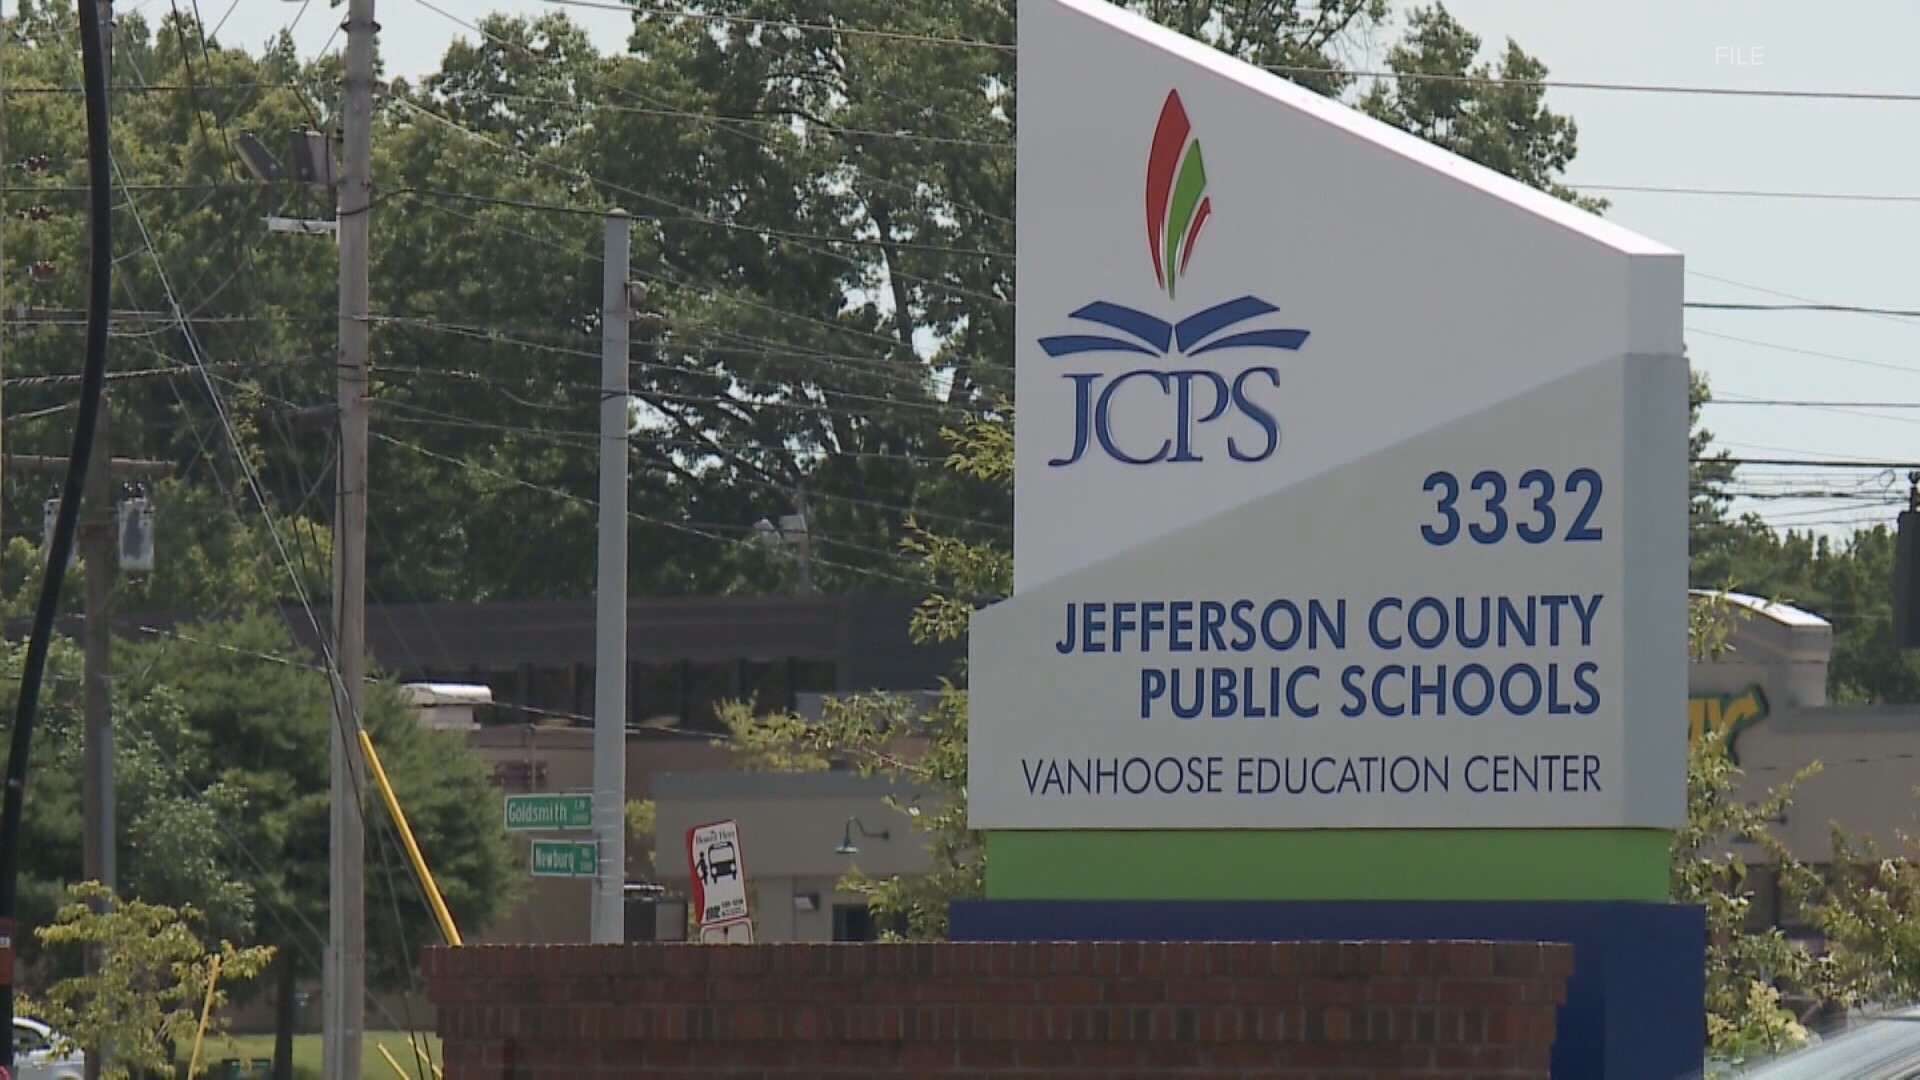 The Jefferson County Teachers Association voted to ratify the new contract with an overwhelming 87% in favor.